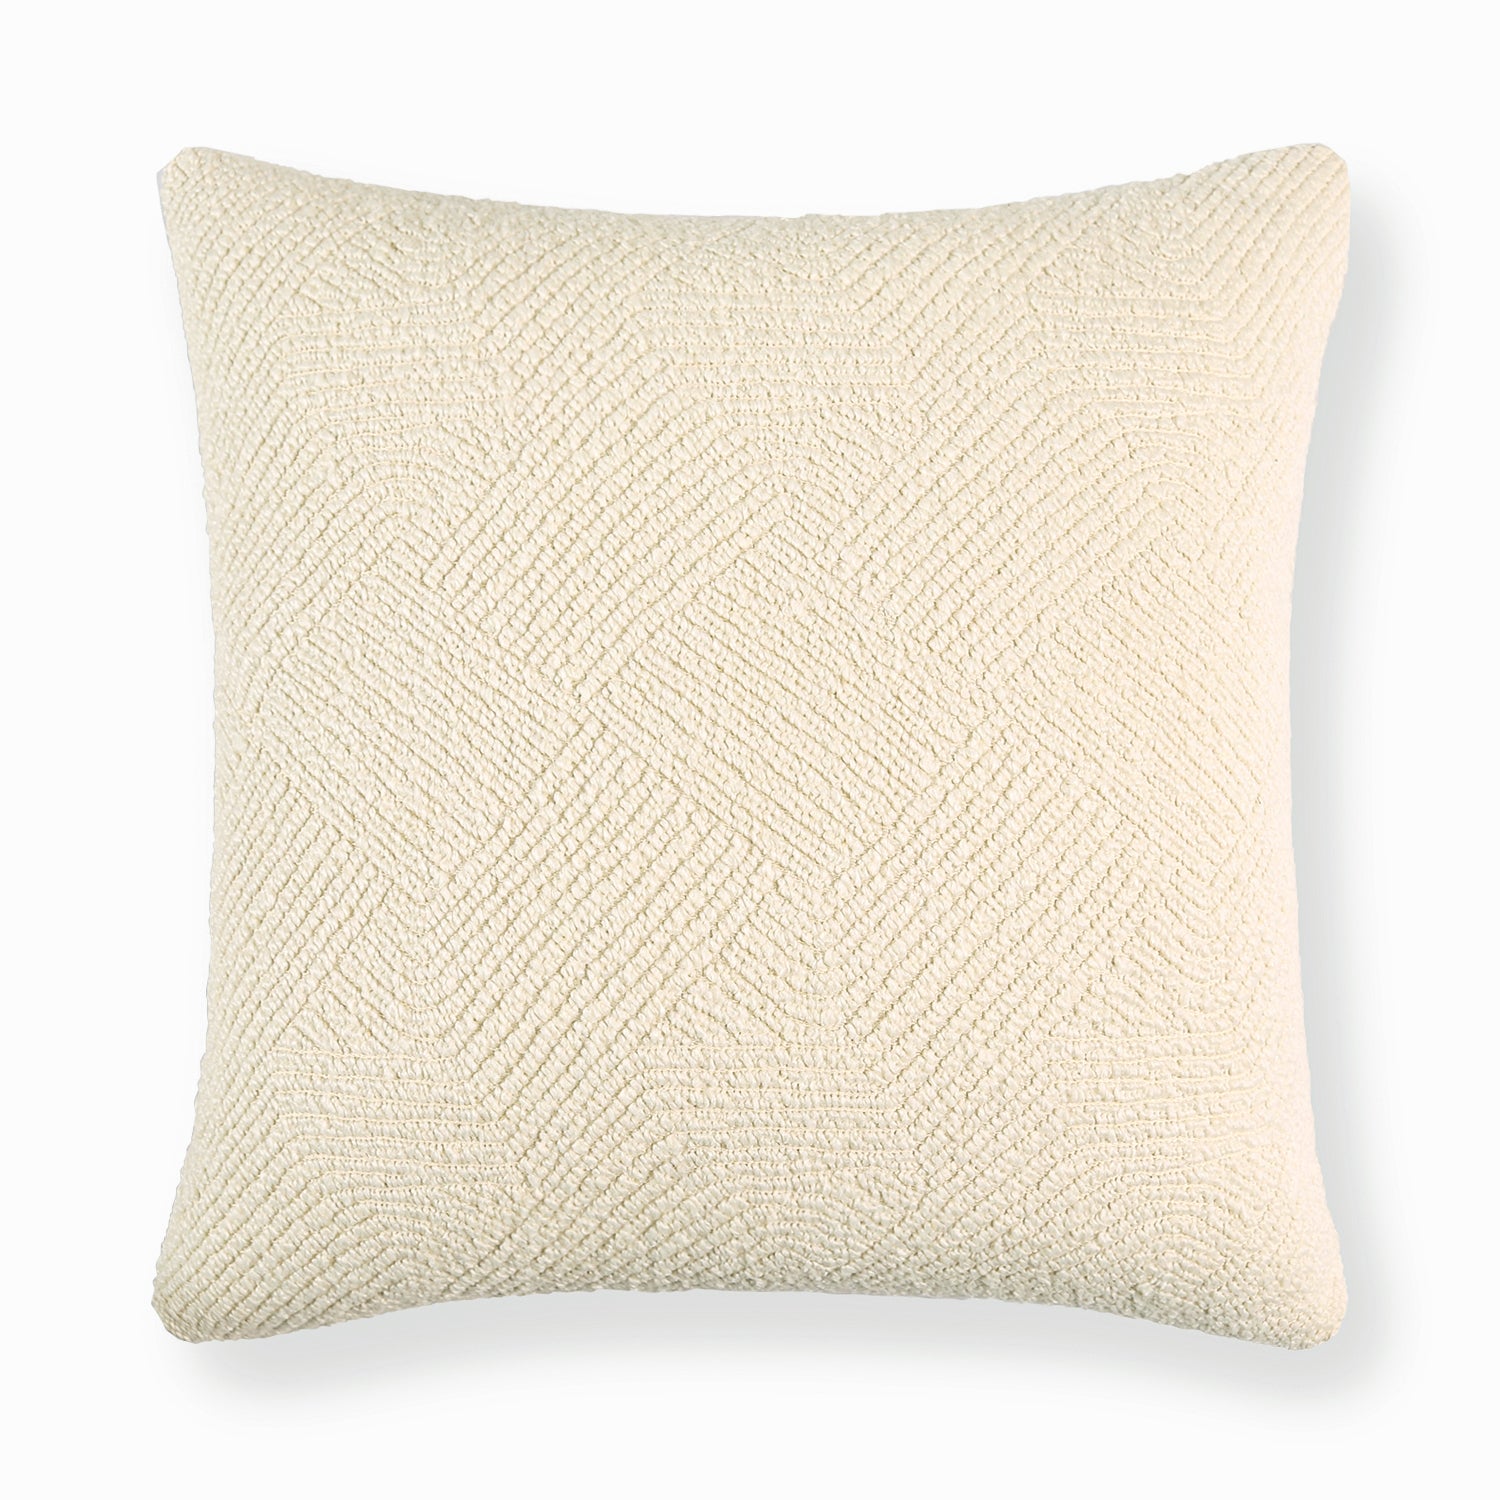 Erice Patterned Wool Pillow Cover-